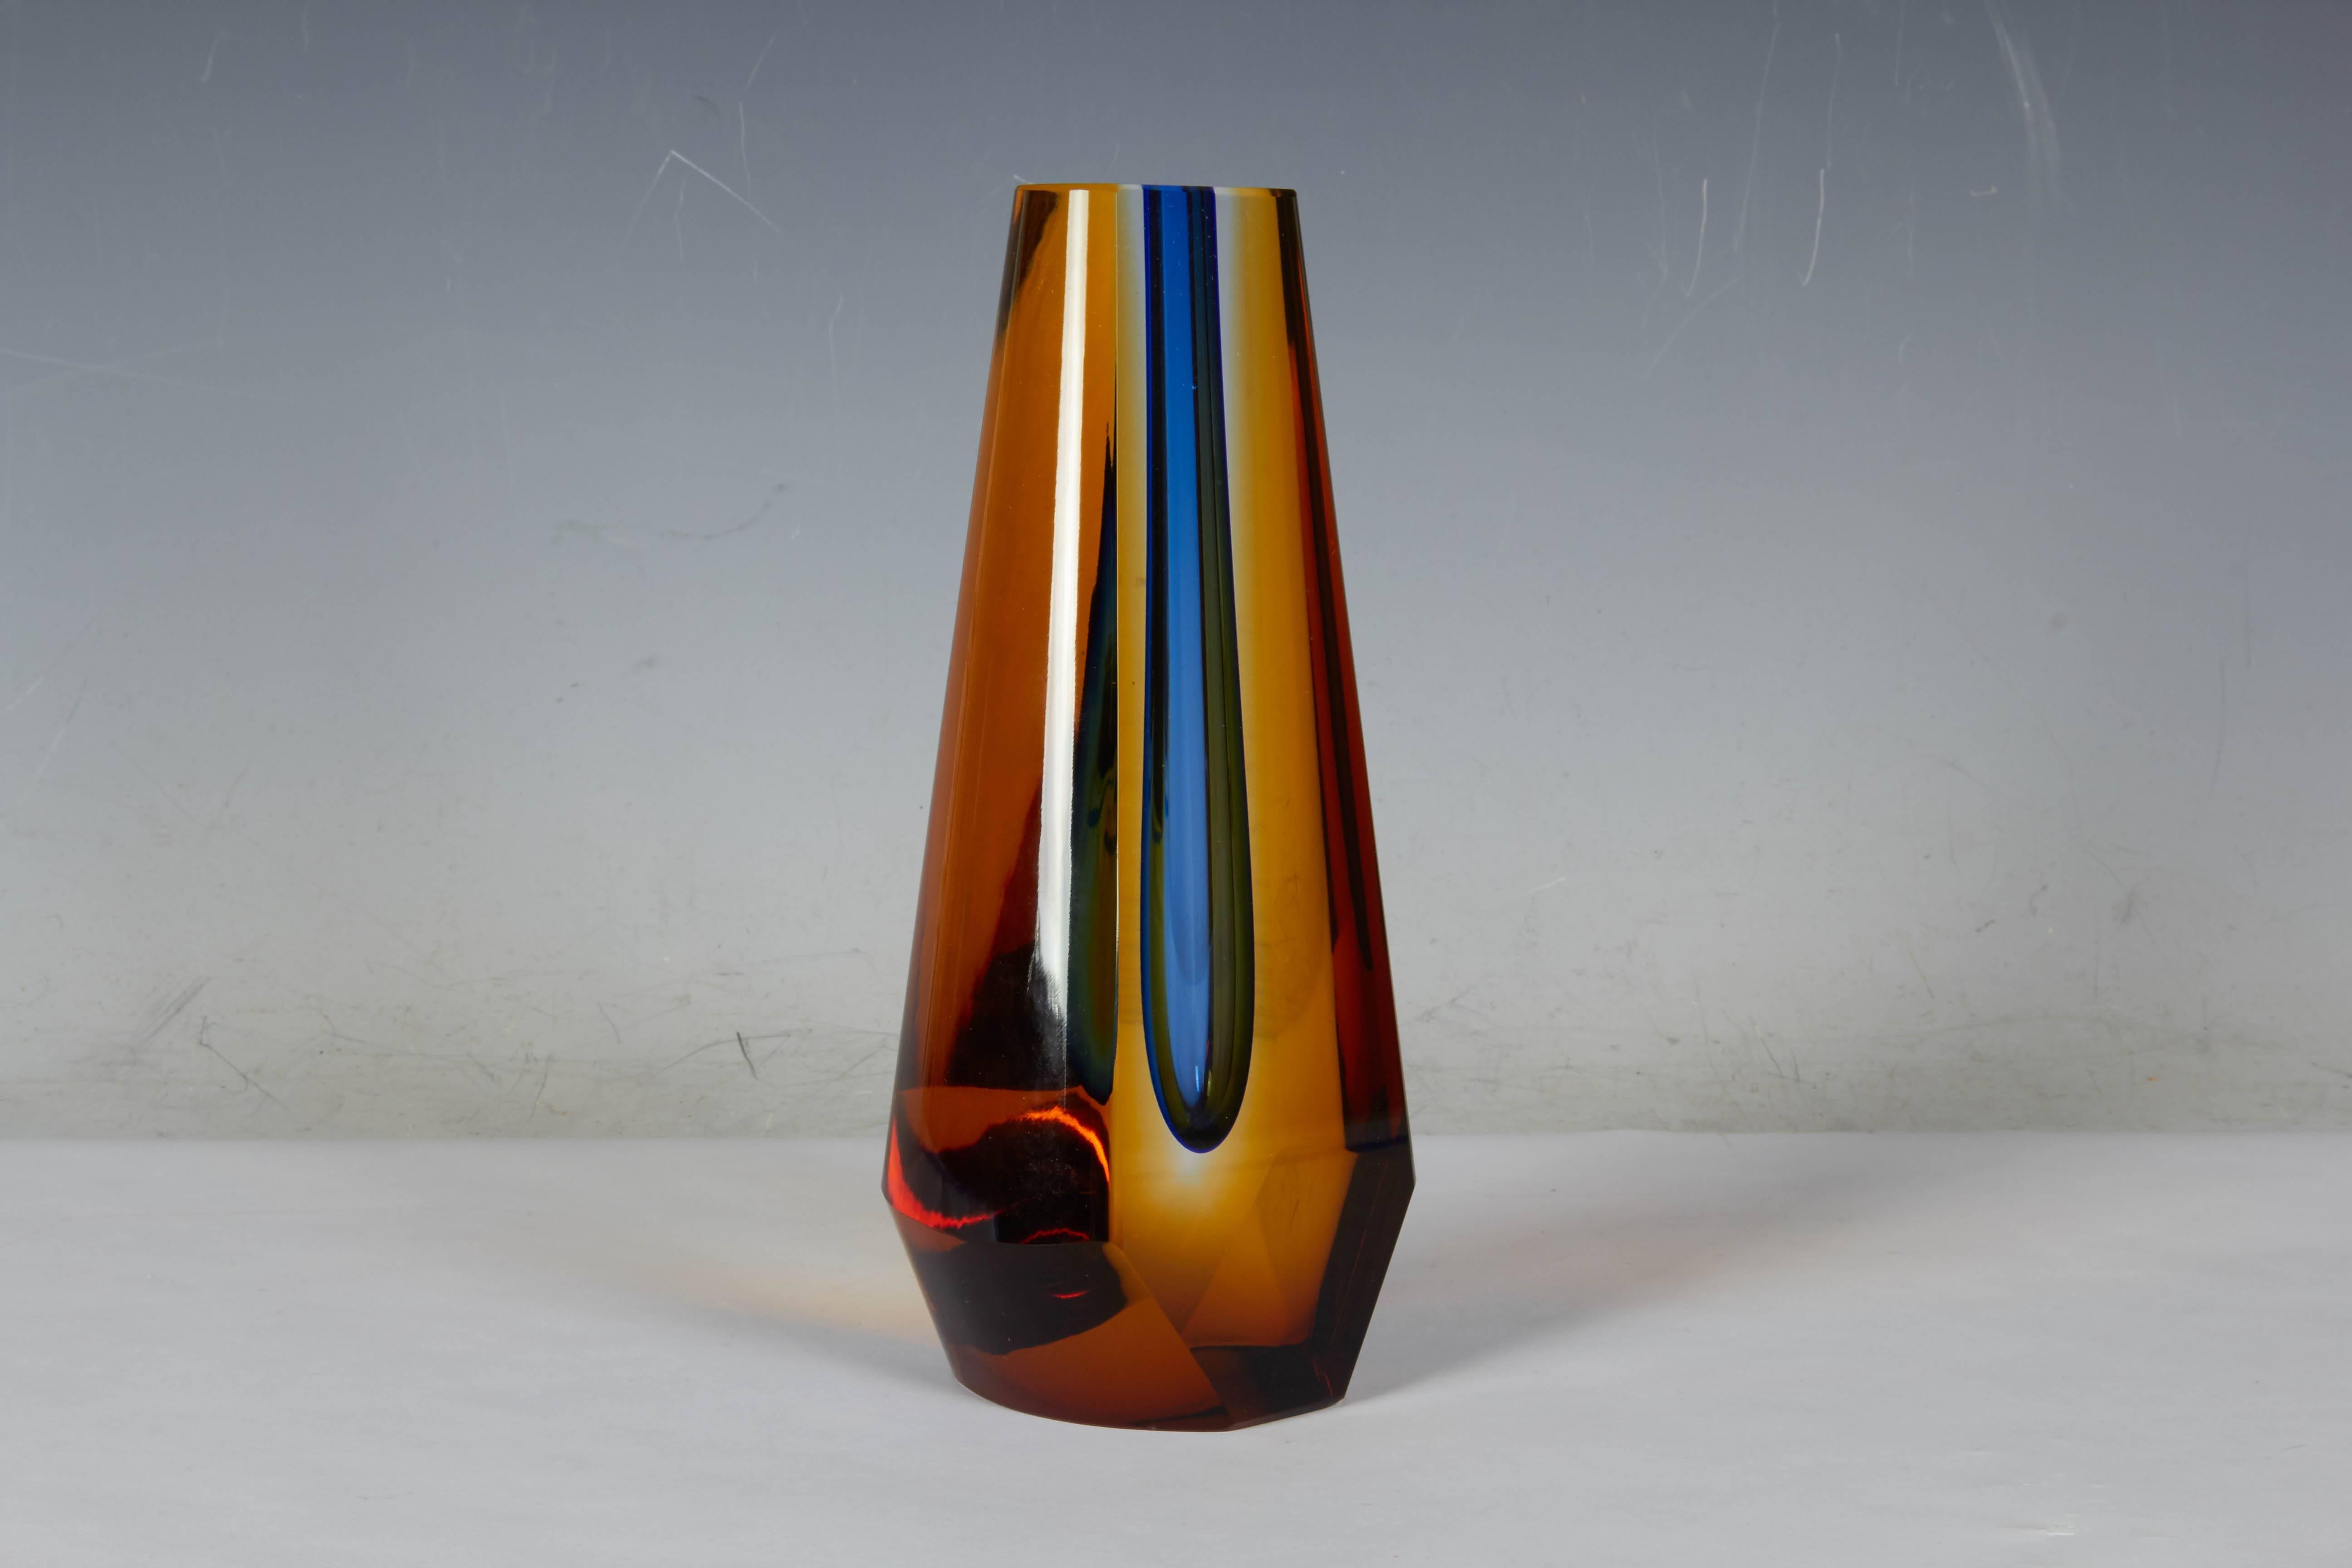 A thick, sculptural glass vase by Czechoslovakian born Pavel Hlava, with tapered and faceted form, comprised of three layers, amber over clear, surrounding a tubular interior in blue. This unique design was created by Hlava for the Milan Triennale